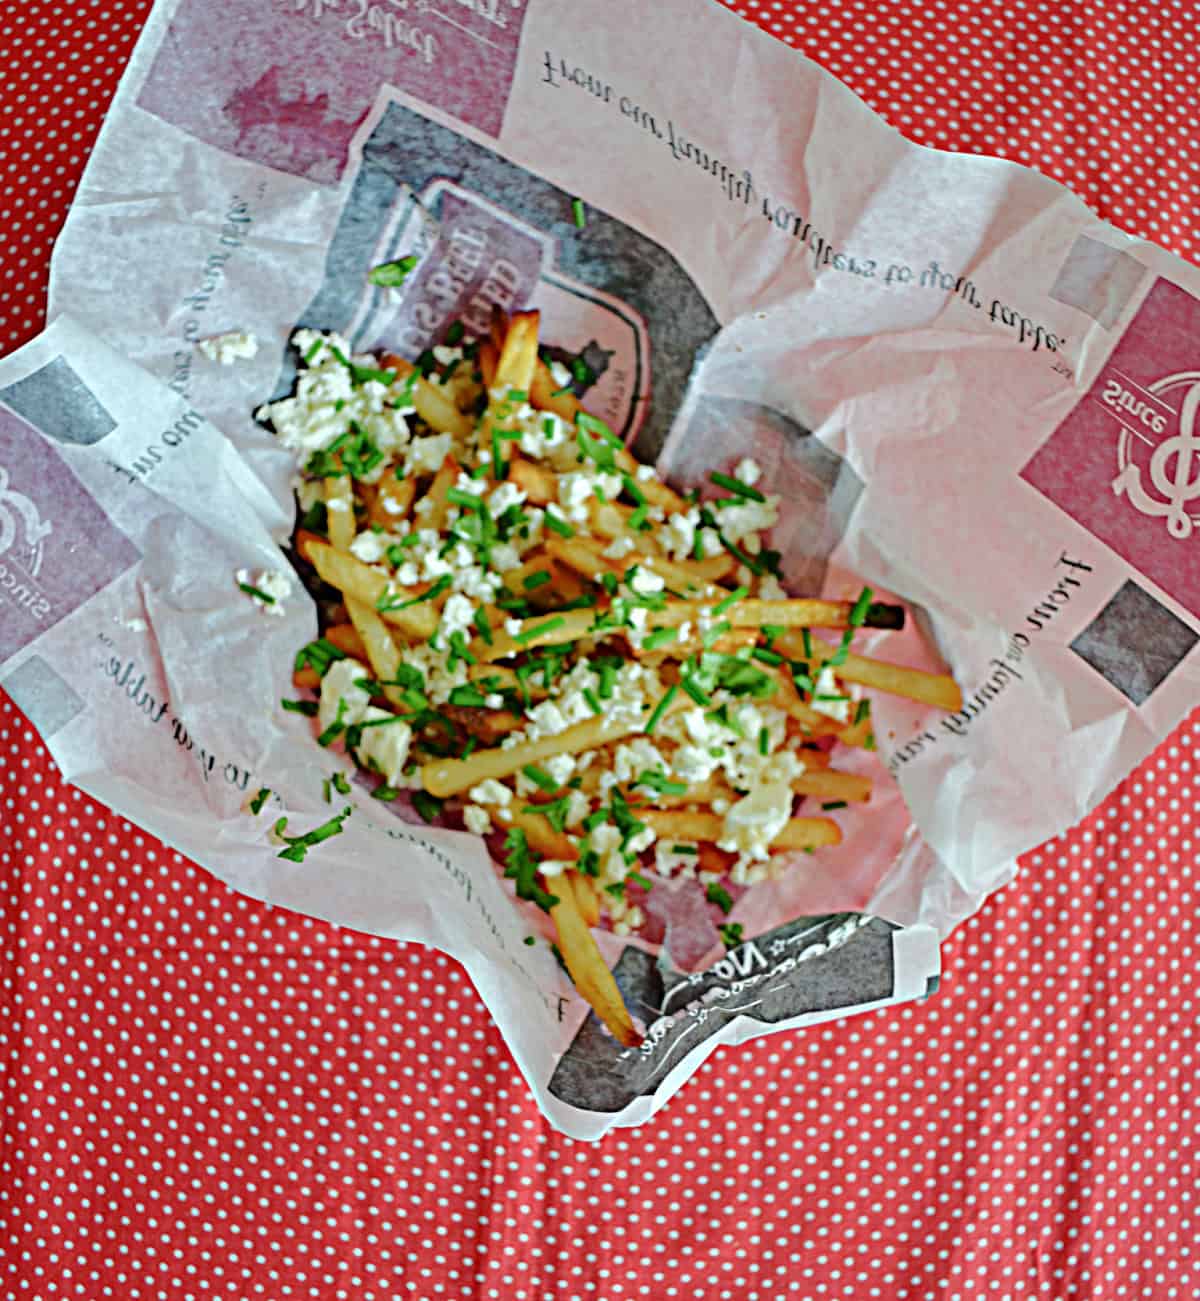 A basket of fries with herbs and feta cheese on top.